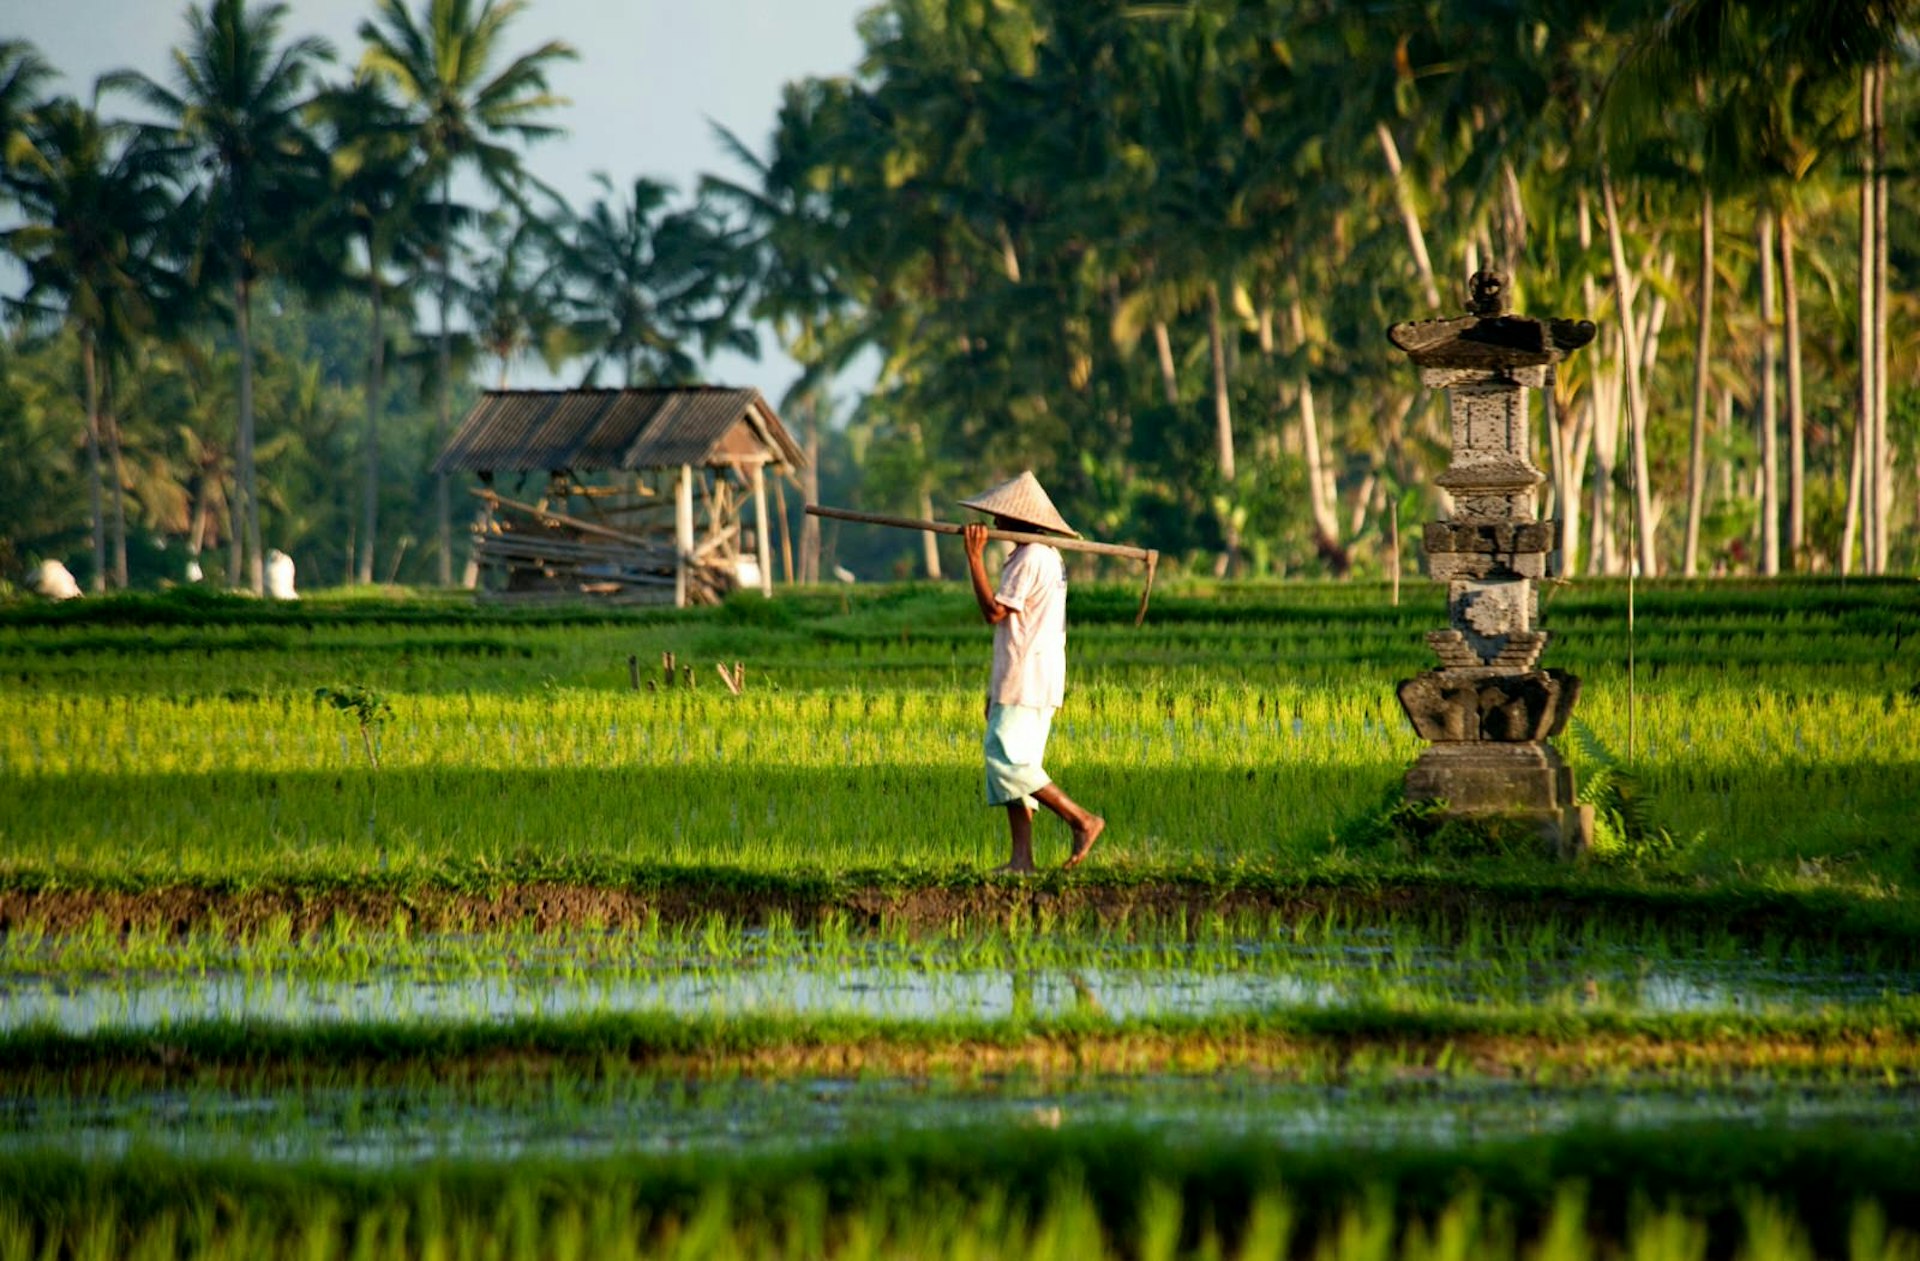 Man working in flooded green rice field. He is wearing a traditional hat and carrying a scythe,